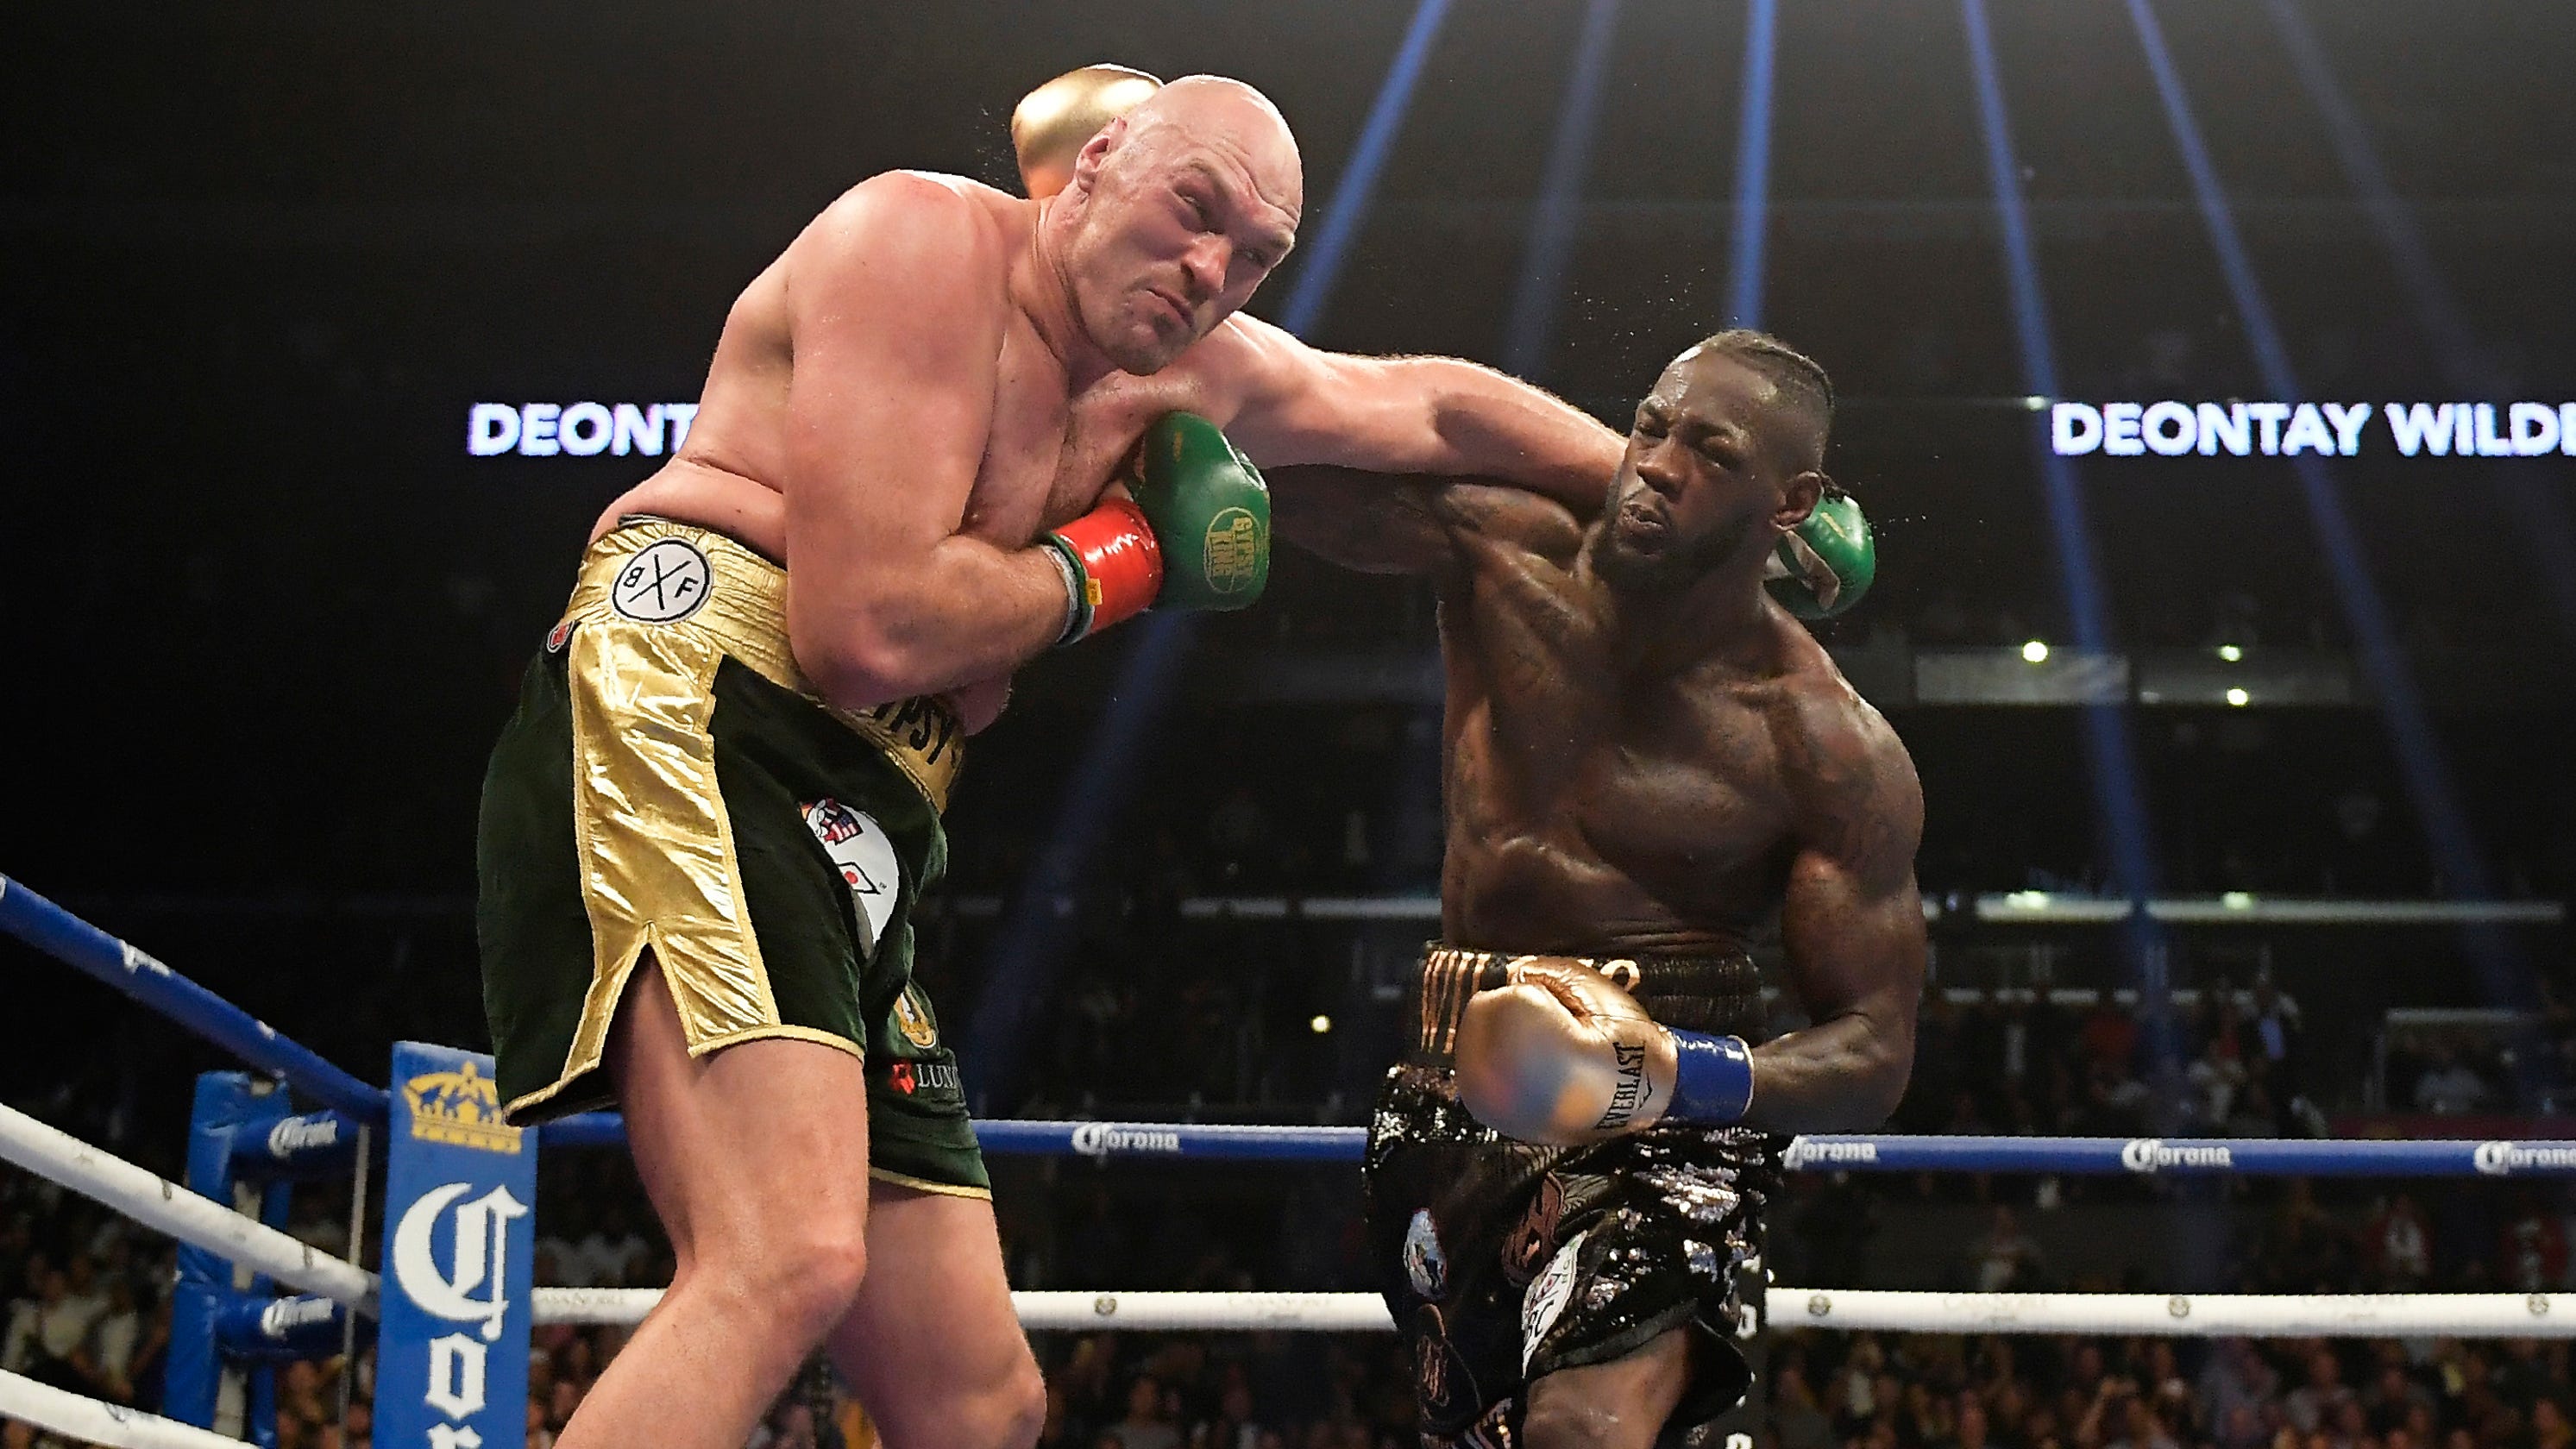 Deontay Wilder, Tyson Fury fight to controversial draw in title bout2986 x 1680